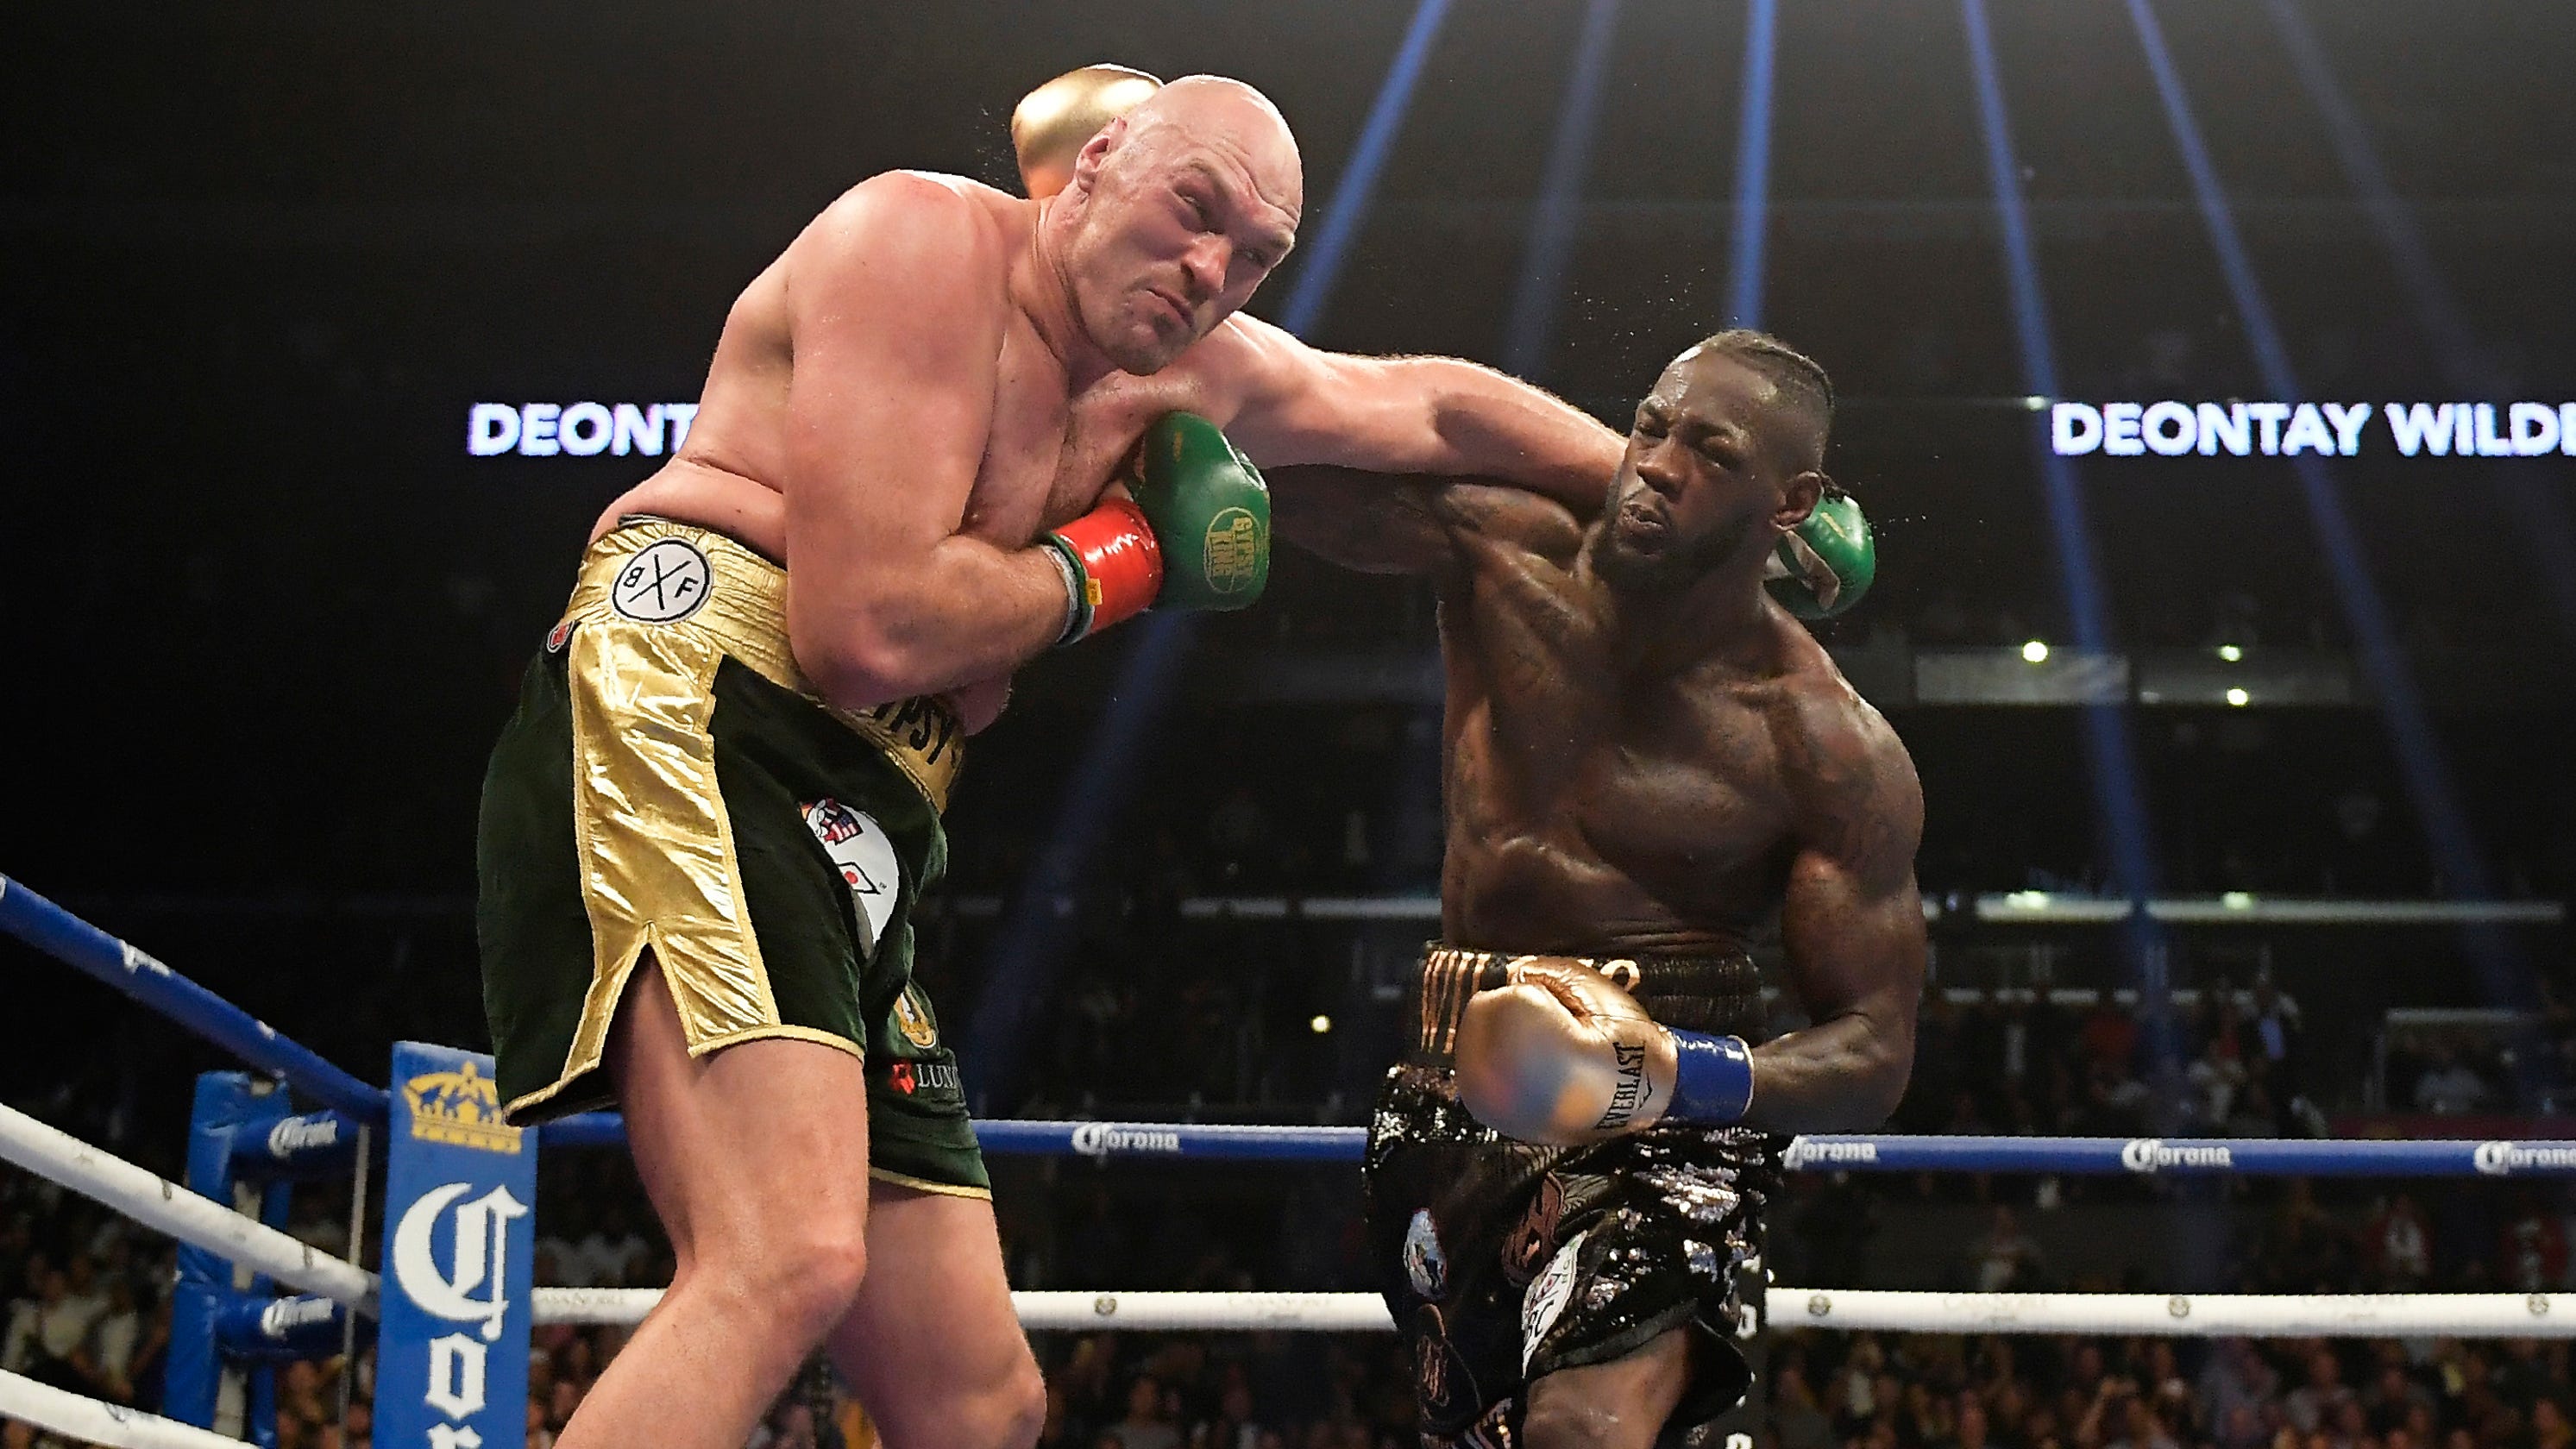 Deontay Wilder, Tyson Fury fight to controversial draw in title bout2986 x 1680